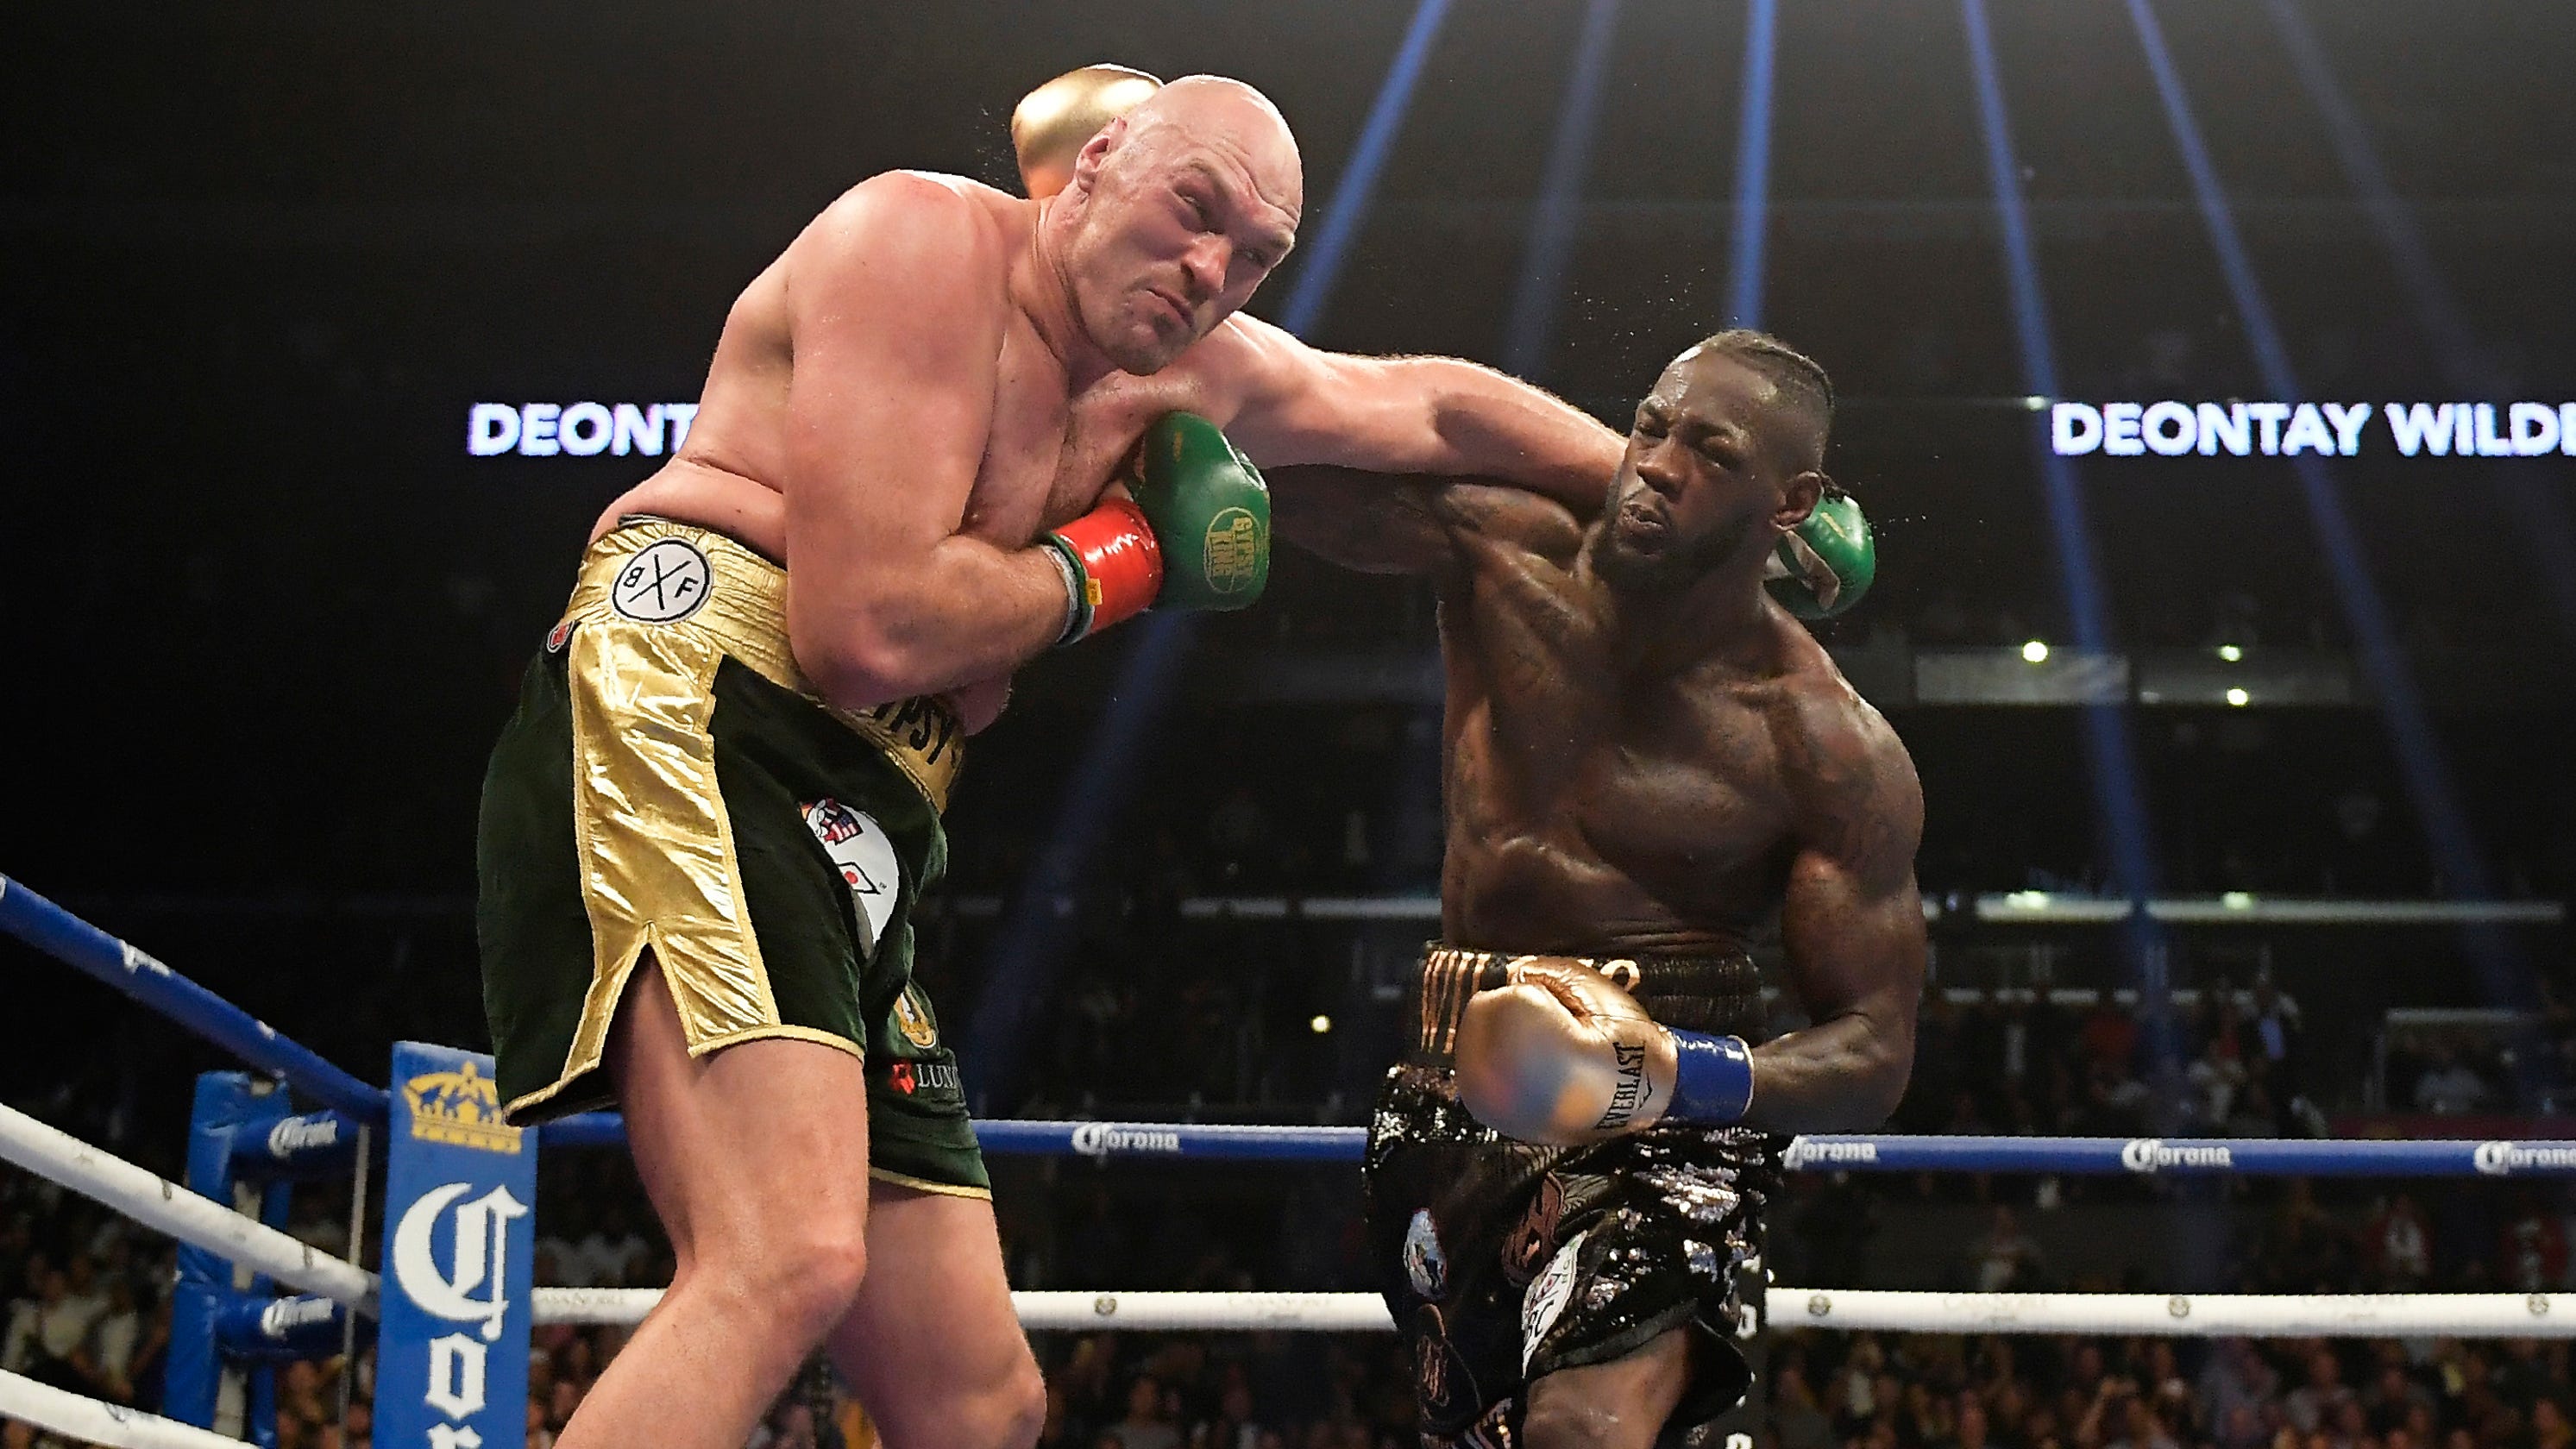 Deontay Wilder, Tyson Fury fight to controversial draw in title bout2986 x 1680